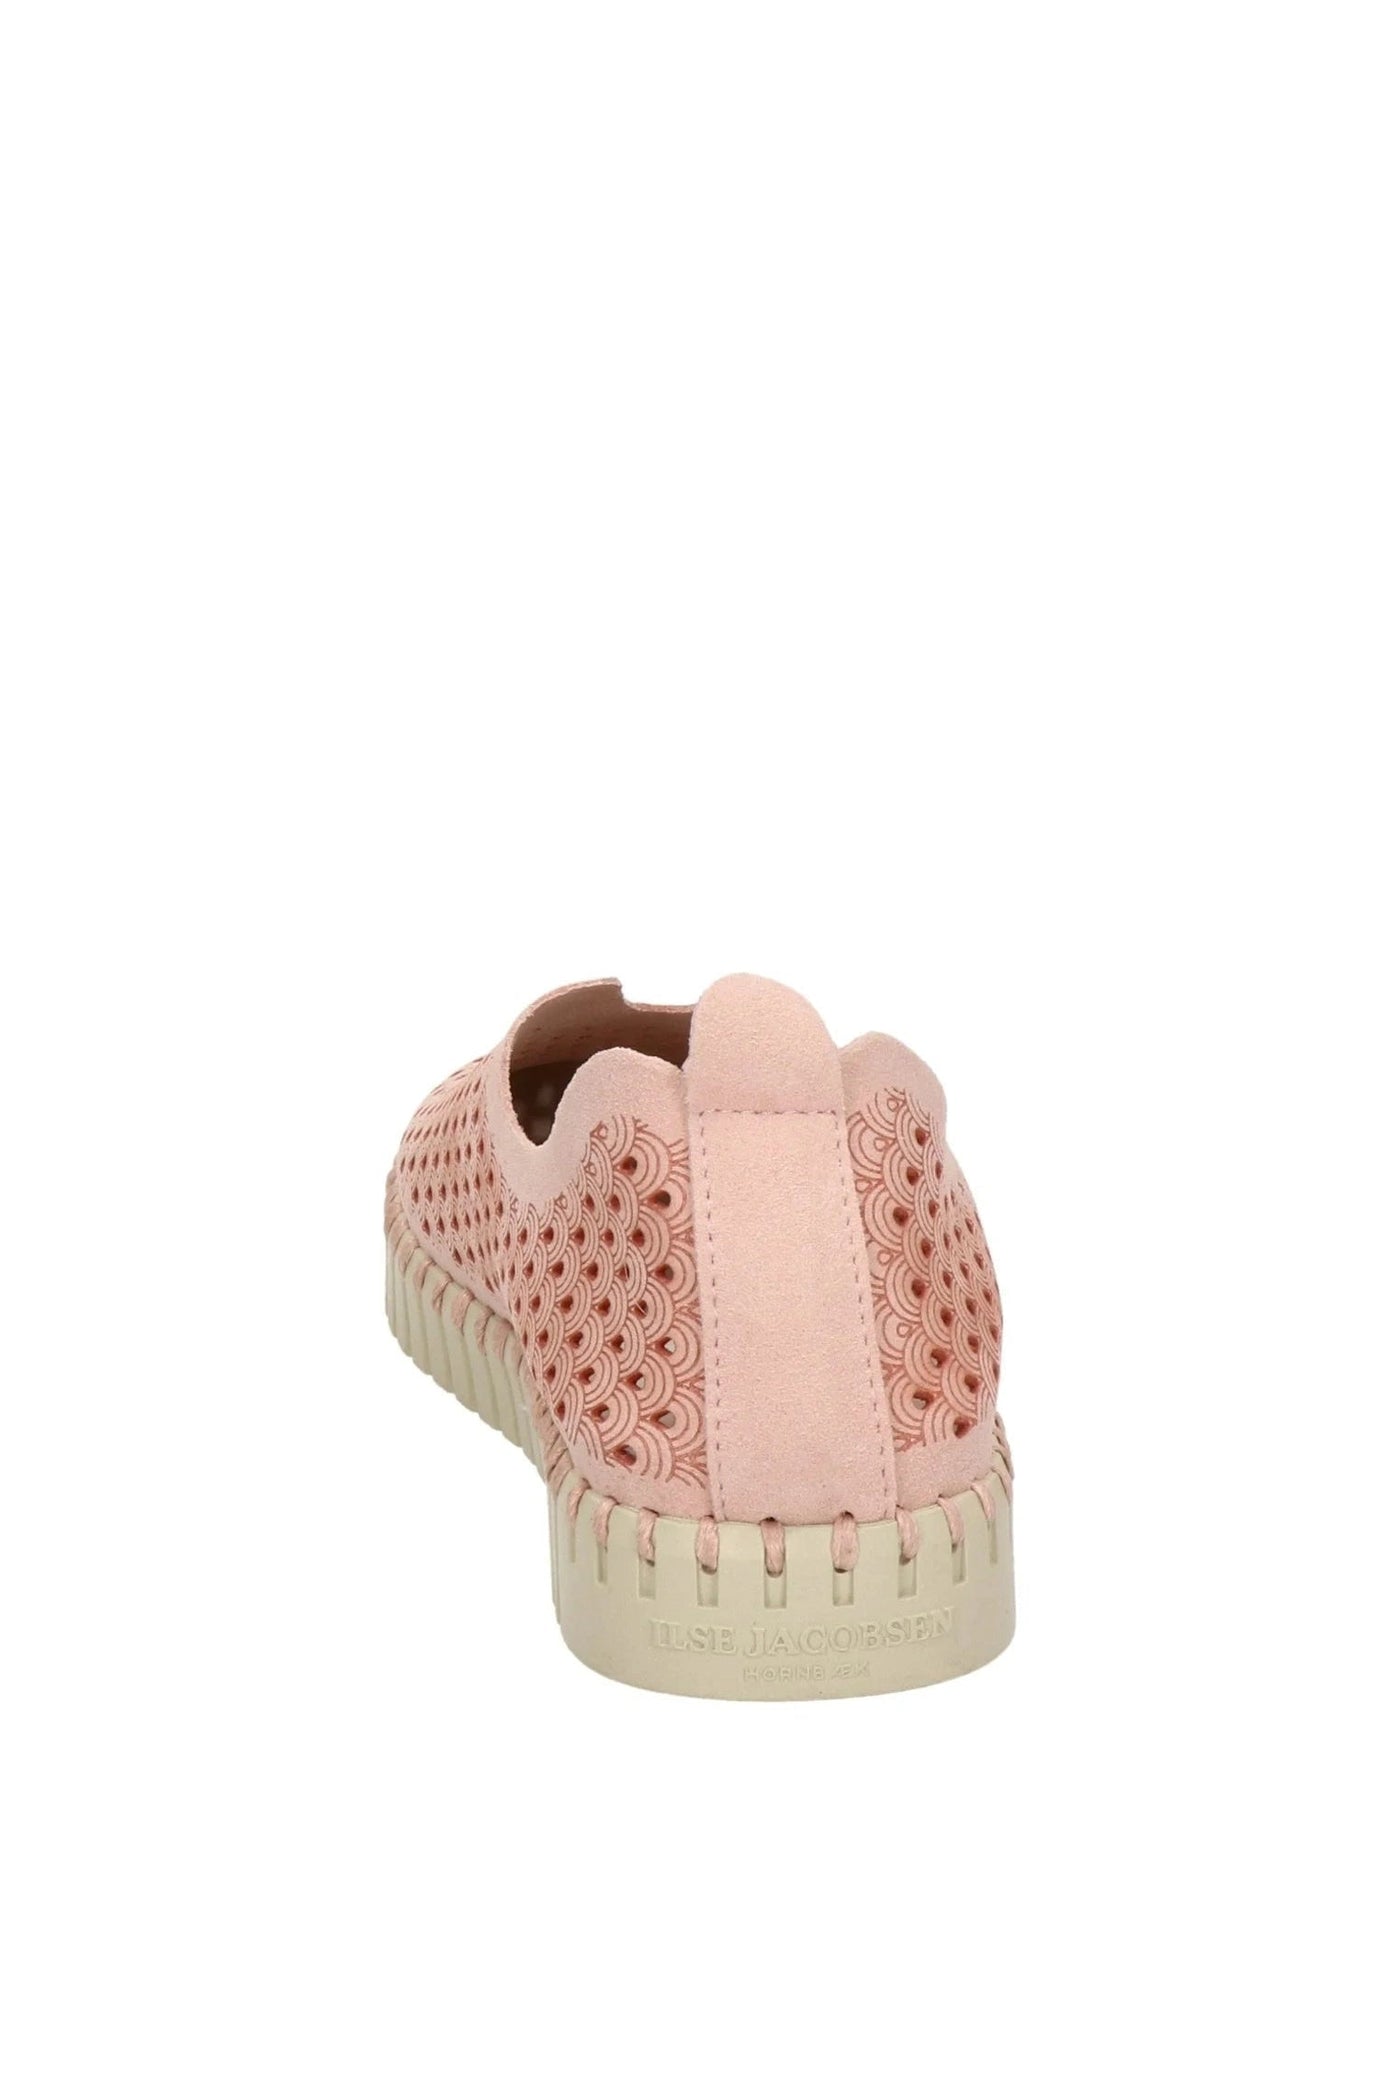 Ilse Jacobsen Tulip Shoes in Adobe Rose-Accessories-Ohh! By Gum - Shop Sustainable